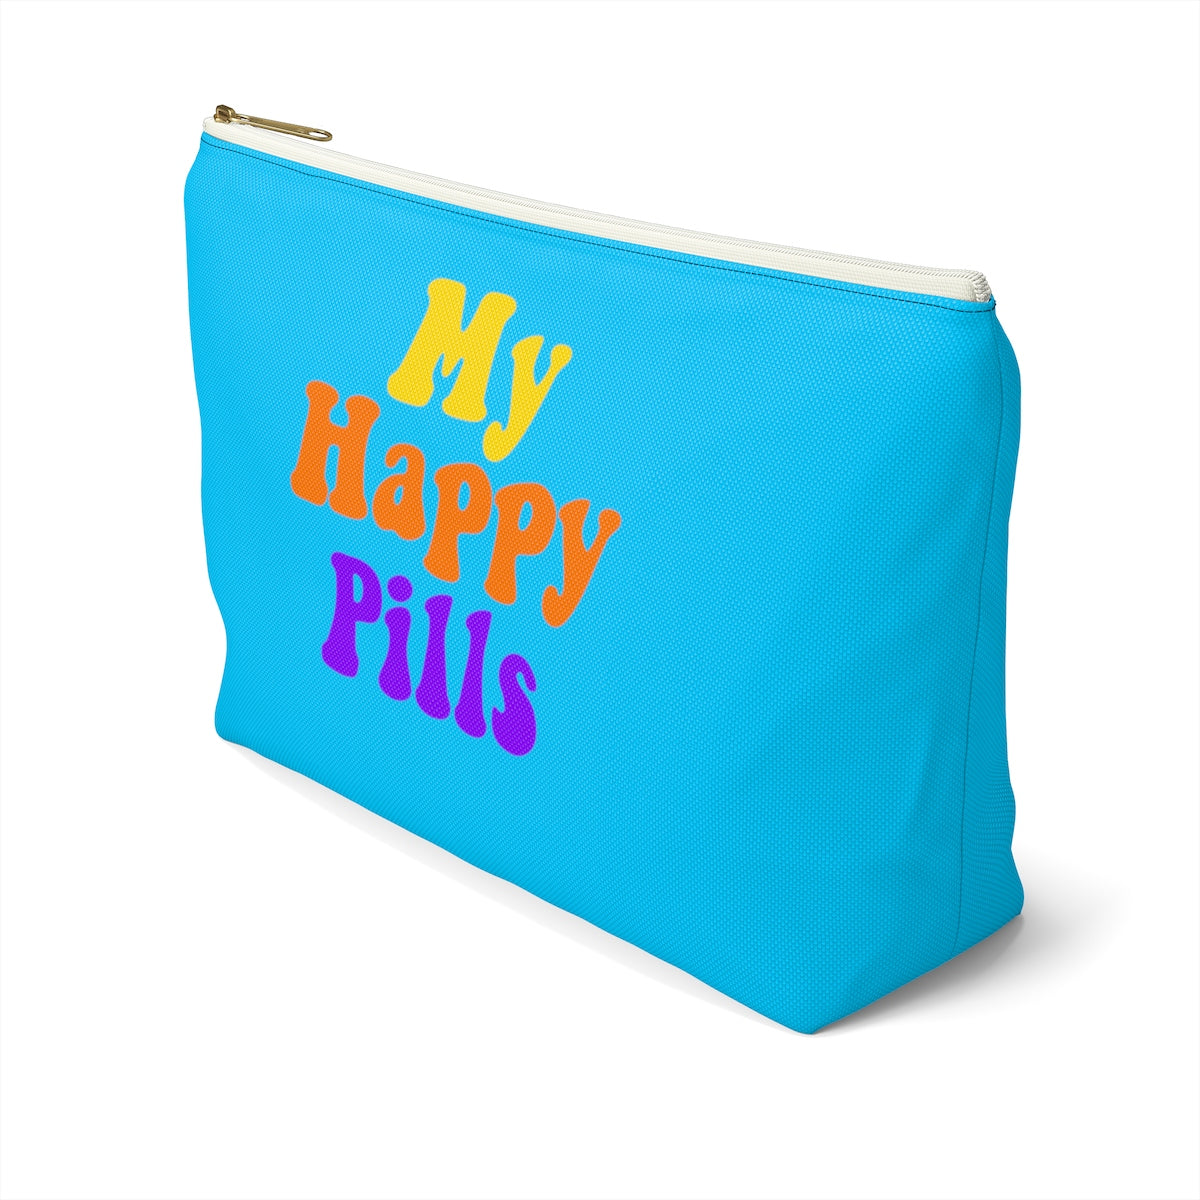 My Happy Pills Pouch, Funny Medical Bag Travel Drugs Medication Medicine Festival Emergency Accessory Pouch w T-bottom Starcove Fashion